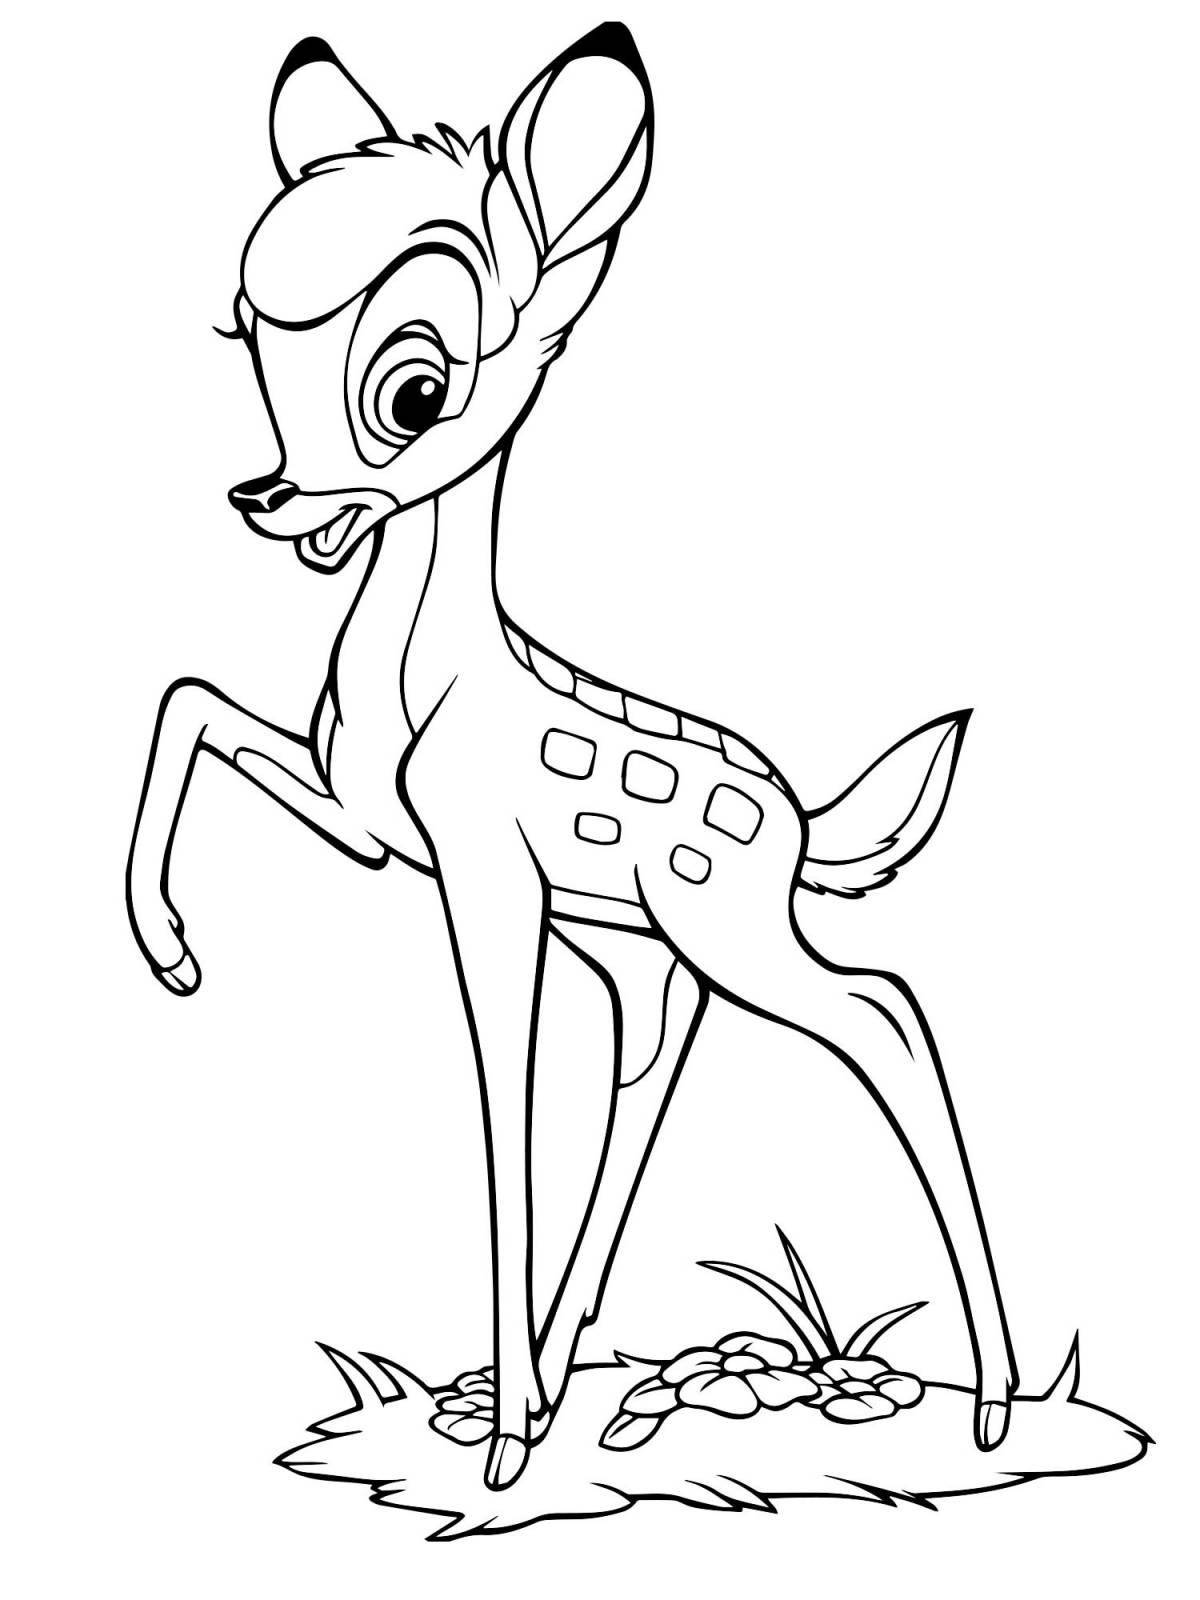 Bambi bright coloring for kids